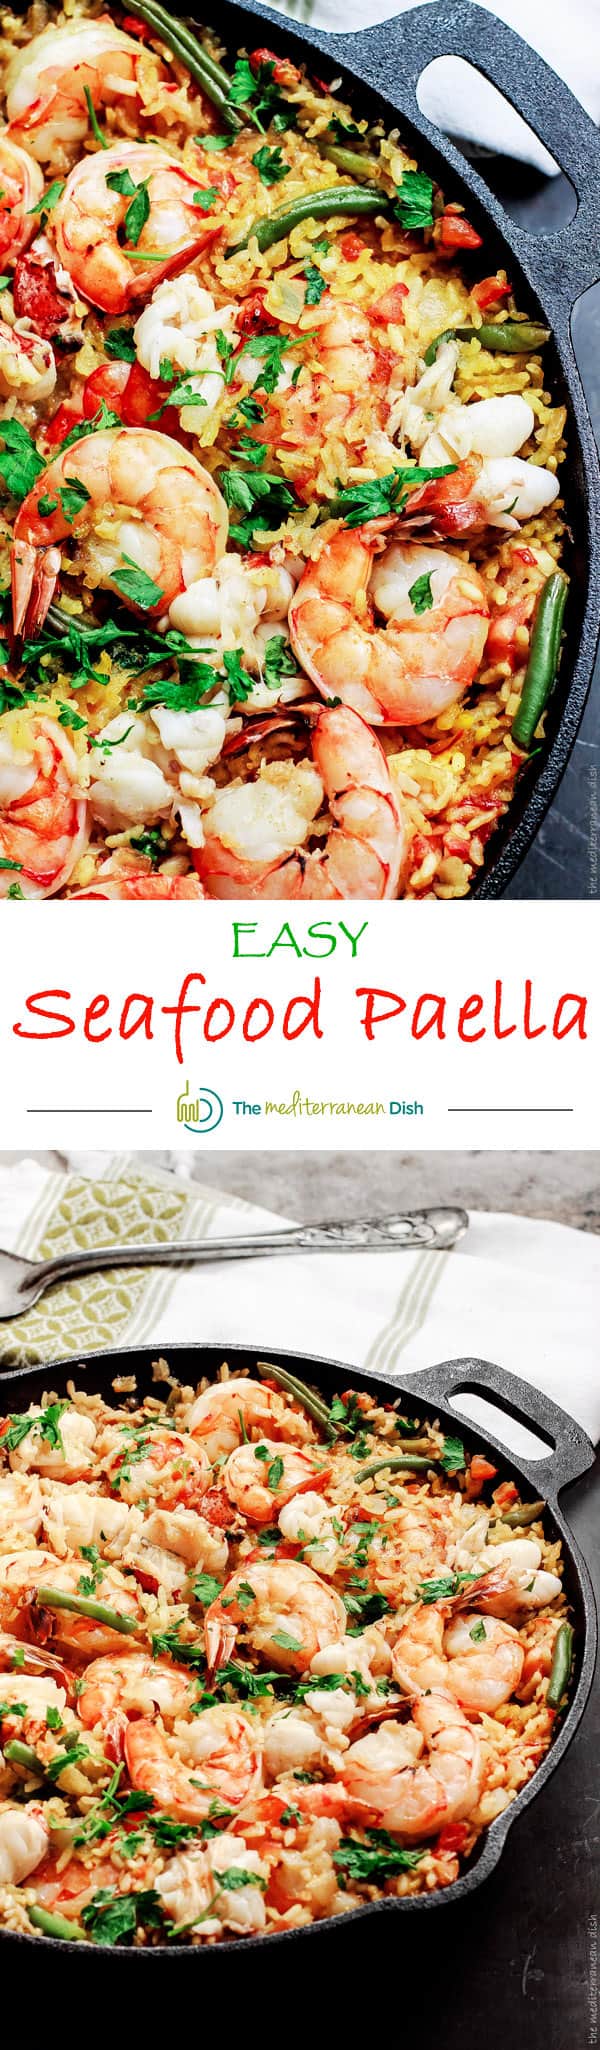 Easy Seafood Paella Recipe | The Mediterranean Dish. Recipe comes with step-by-step photo tutorial to guide your cooking! Love this shrimp and lobster nestled in a bed of saffron rice! A must try from @themeddish